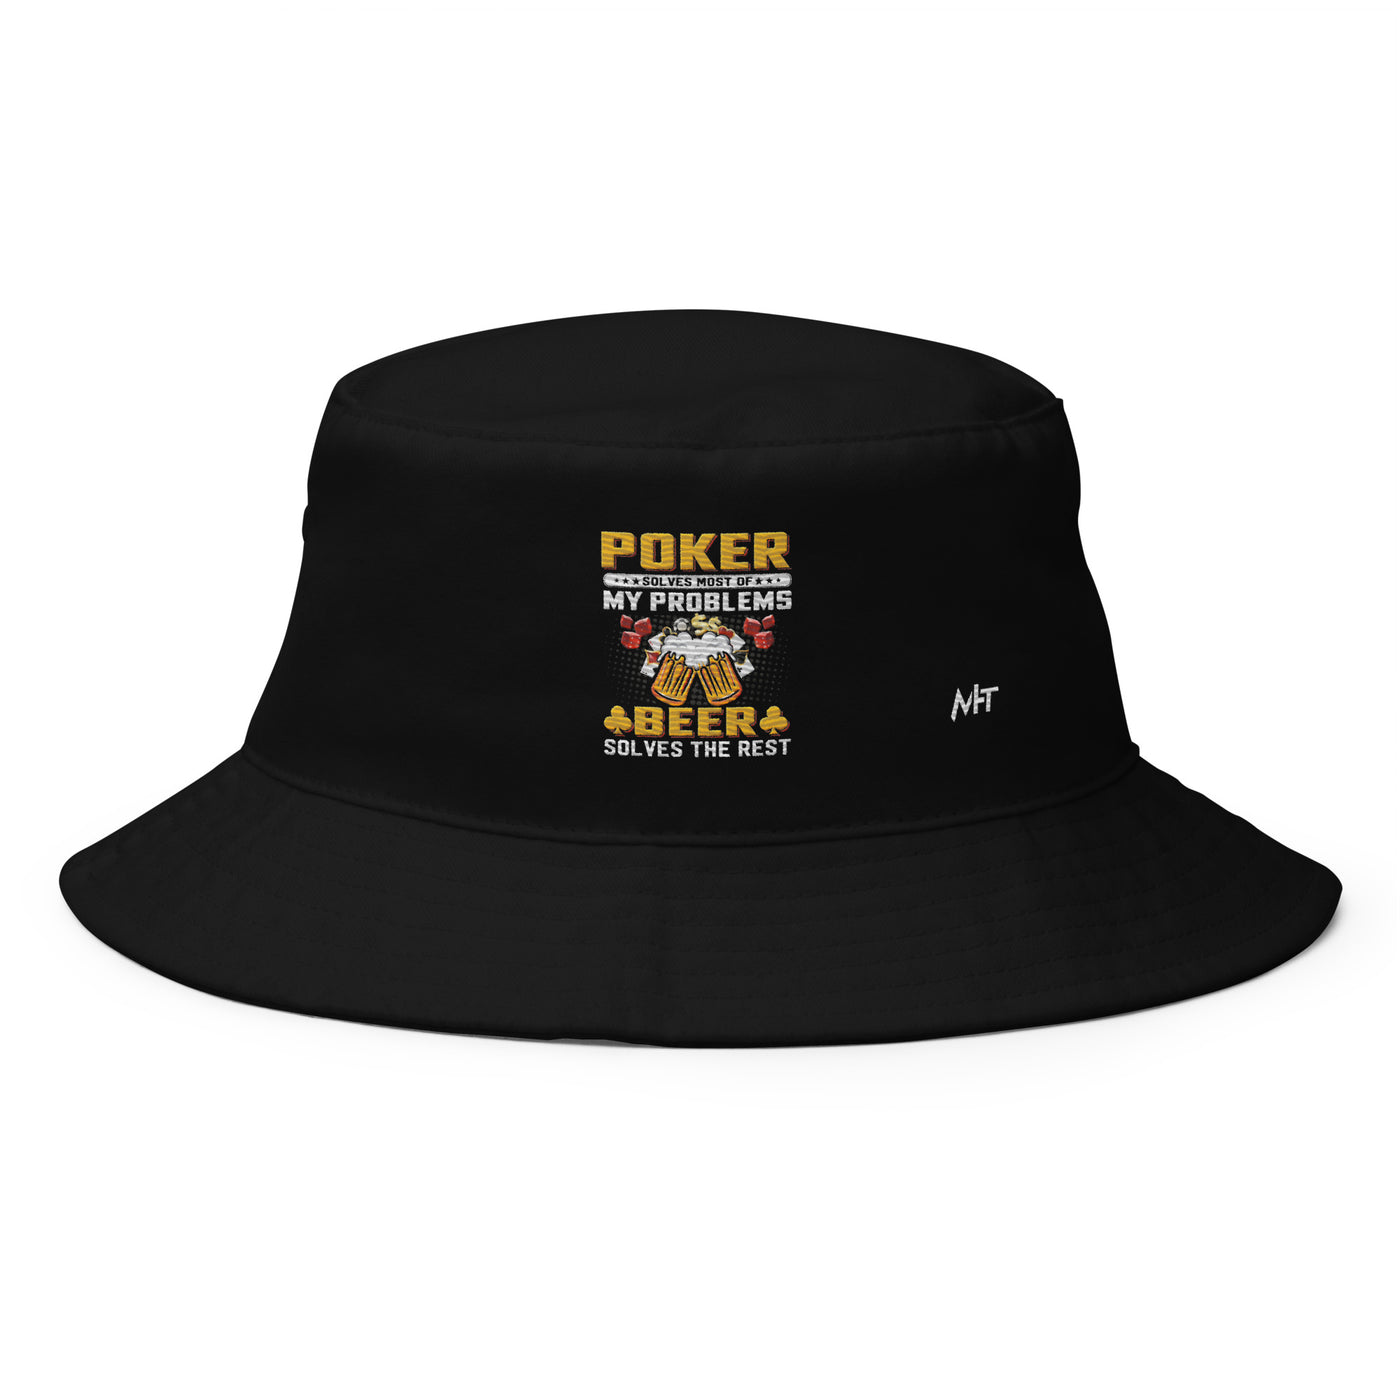 Poker Solves Most of My Problems, but Beer Solves the Rest - Bucket Hat